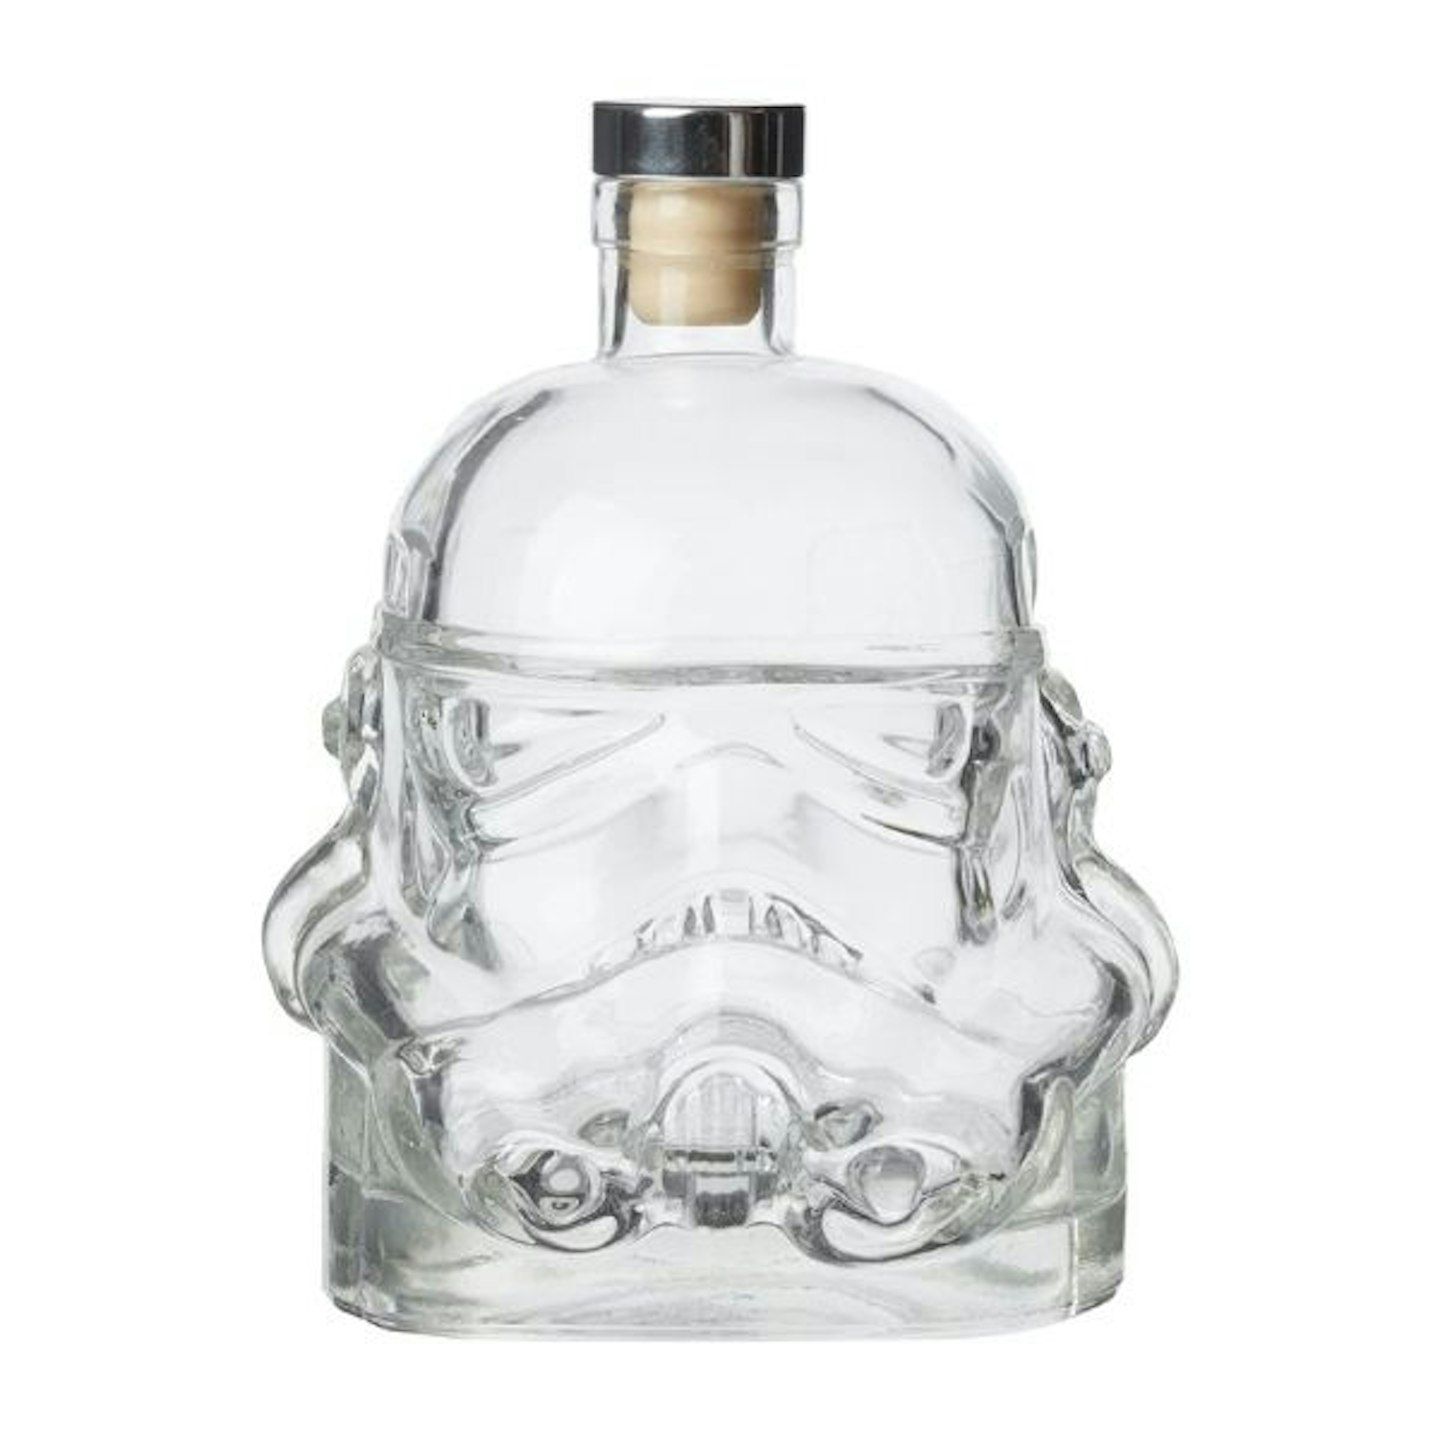 Thumbs Up Star Wars Glass Stormtrooper Decanter